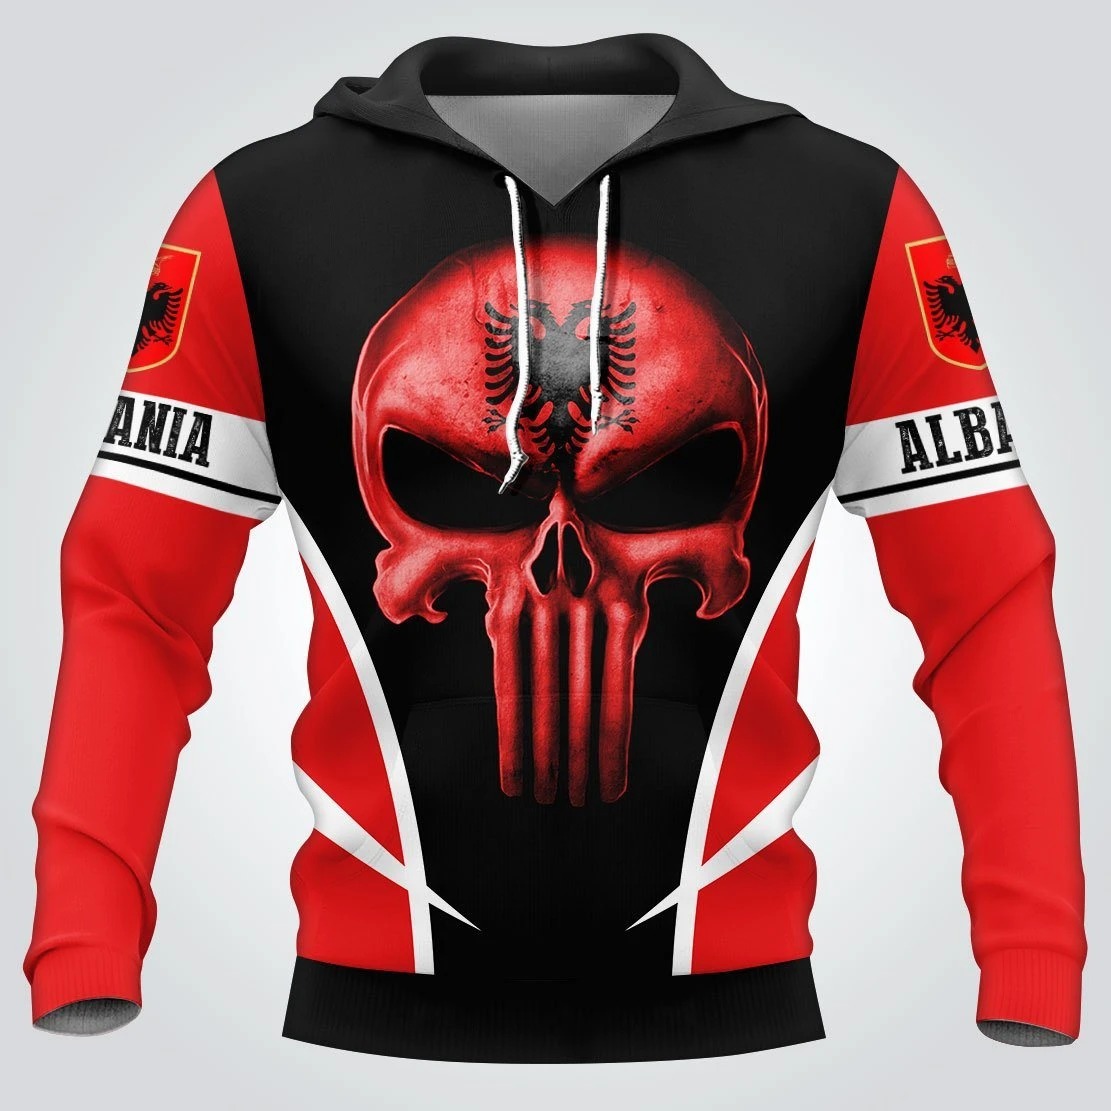 Albania A Place Your Feet Punisher Skull 3d Full Printing hoodie1